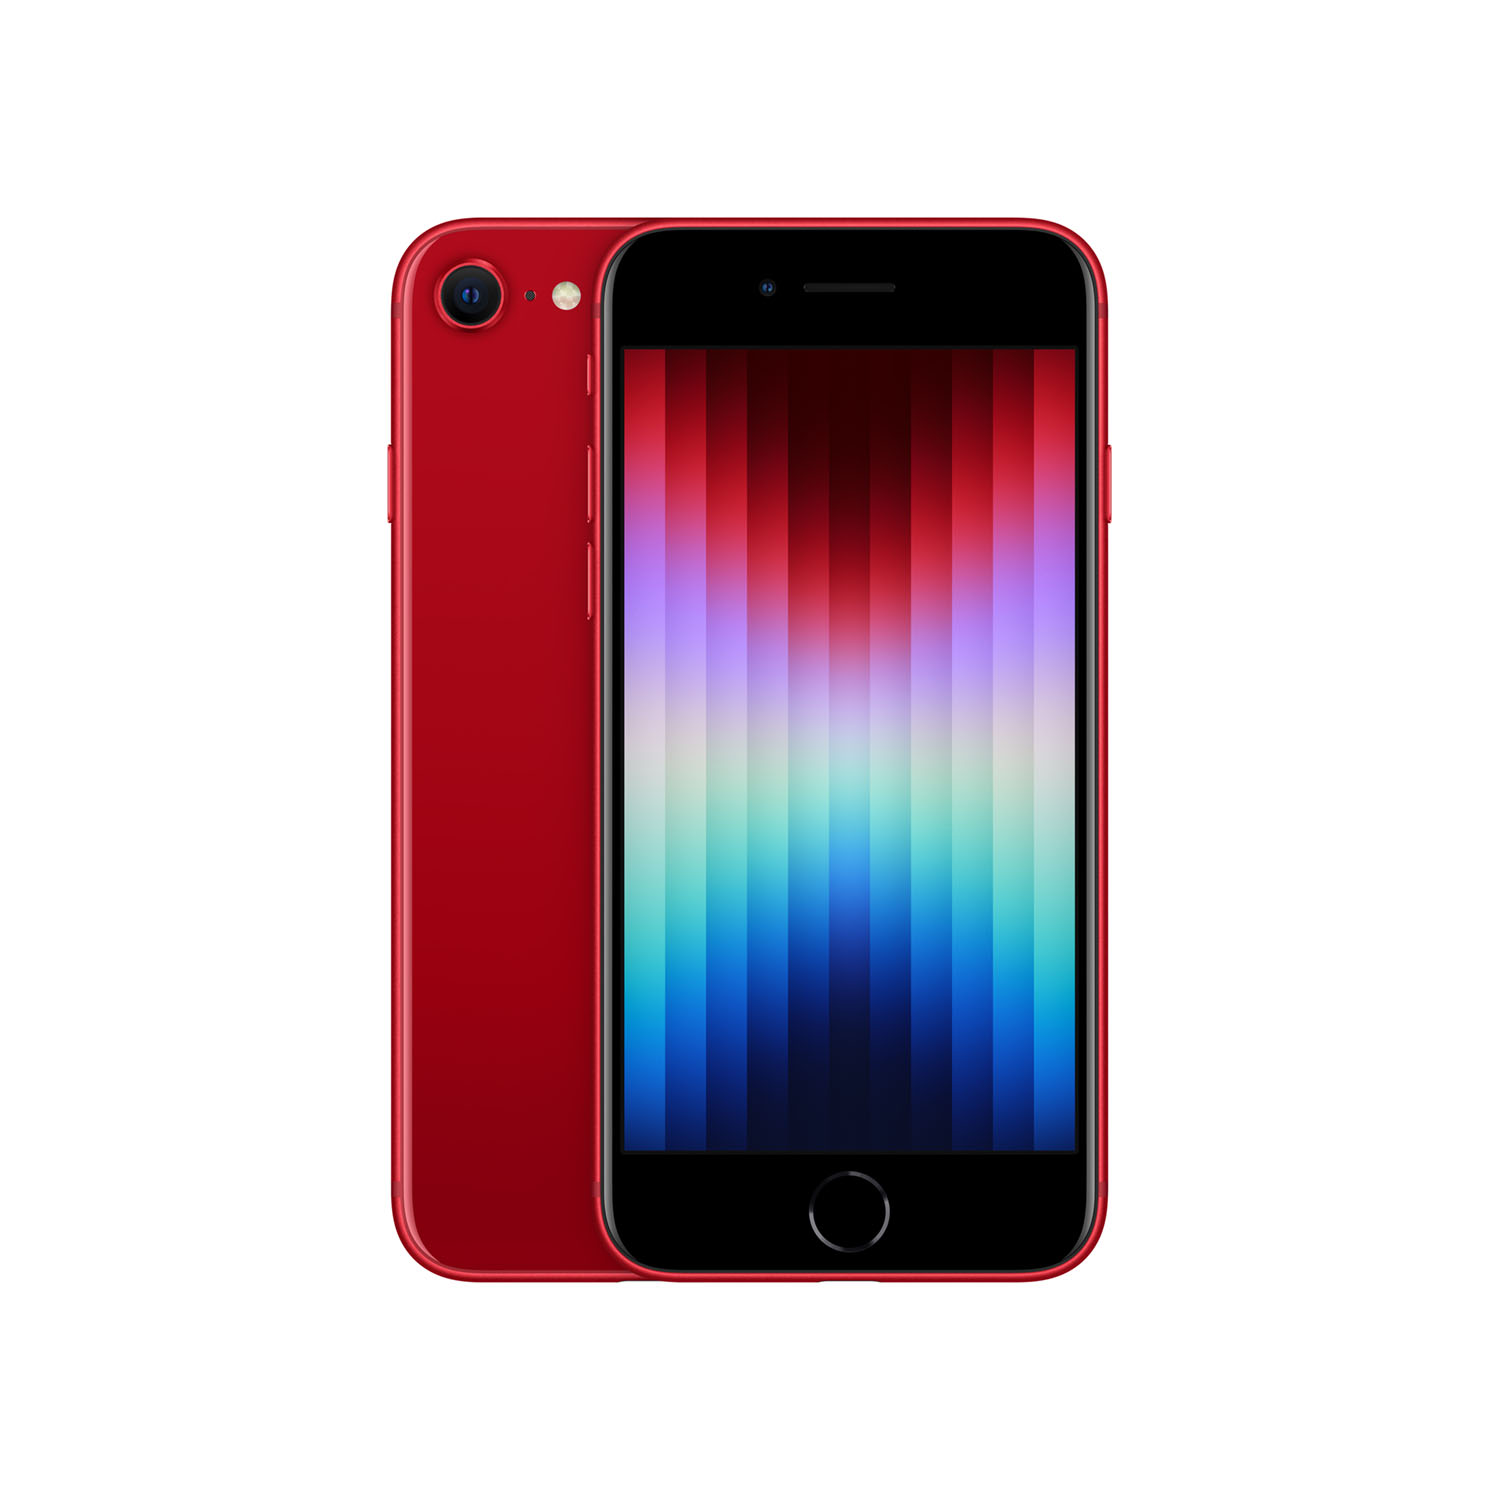 Apple iPhone SE 128GB - (PRODUCT)RED